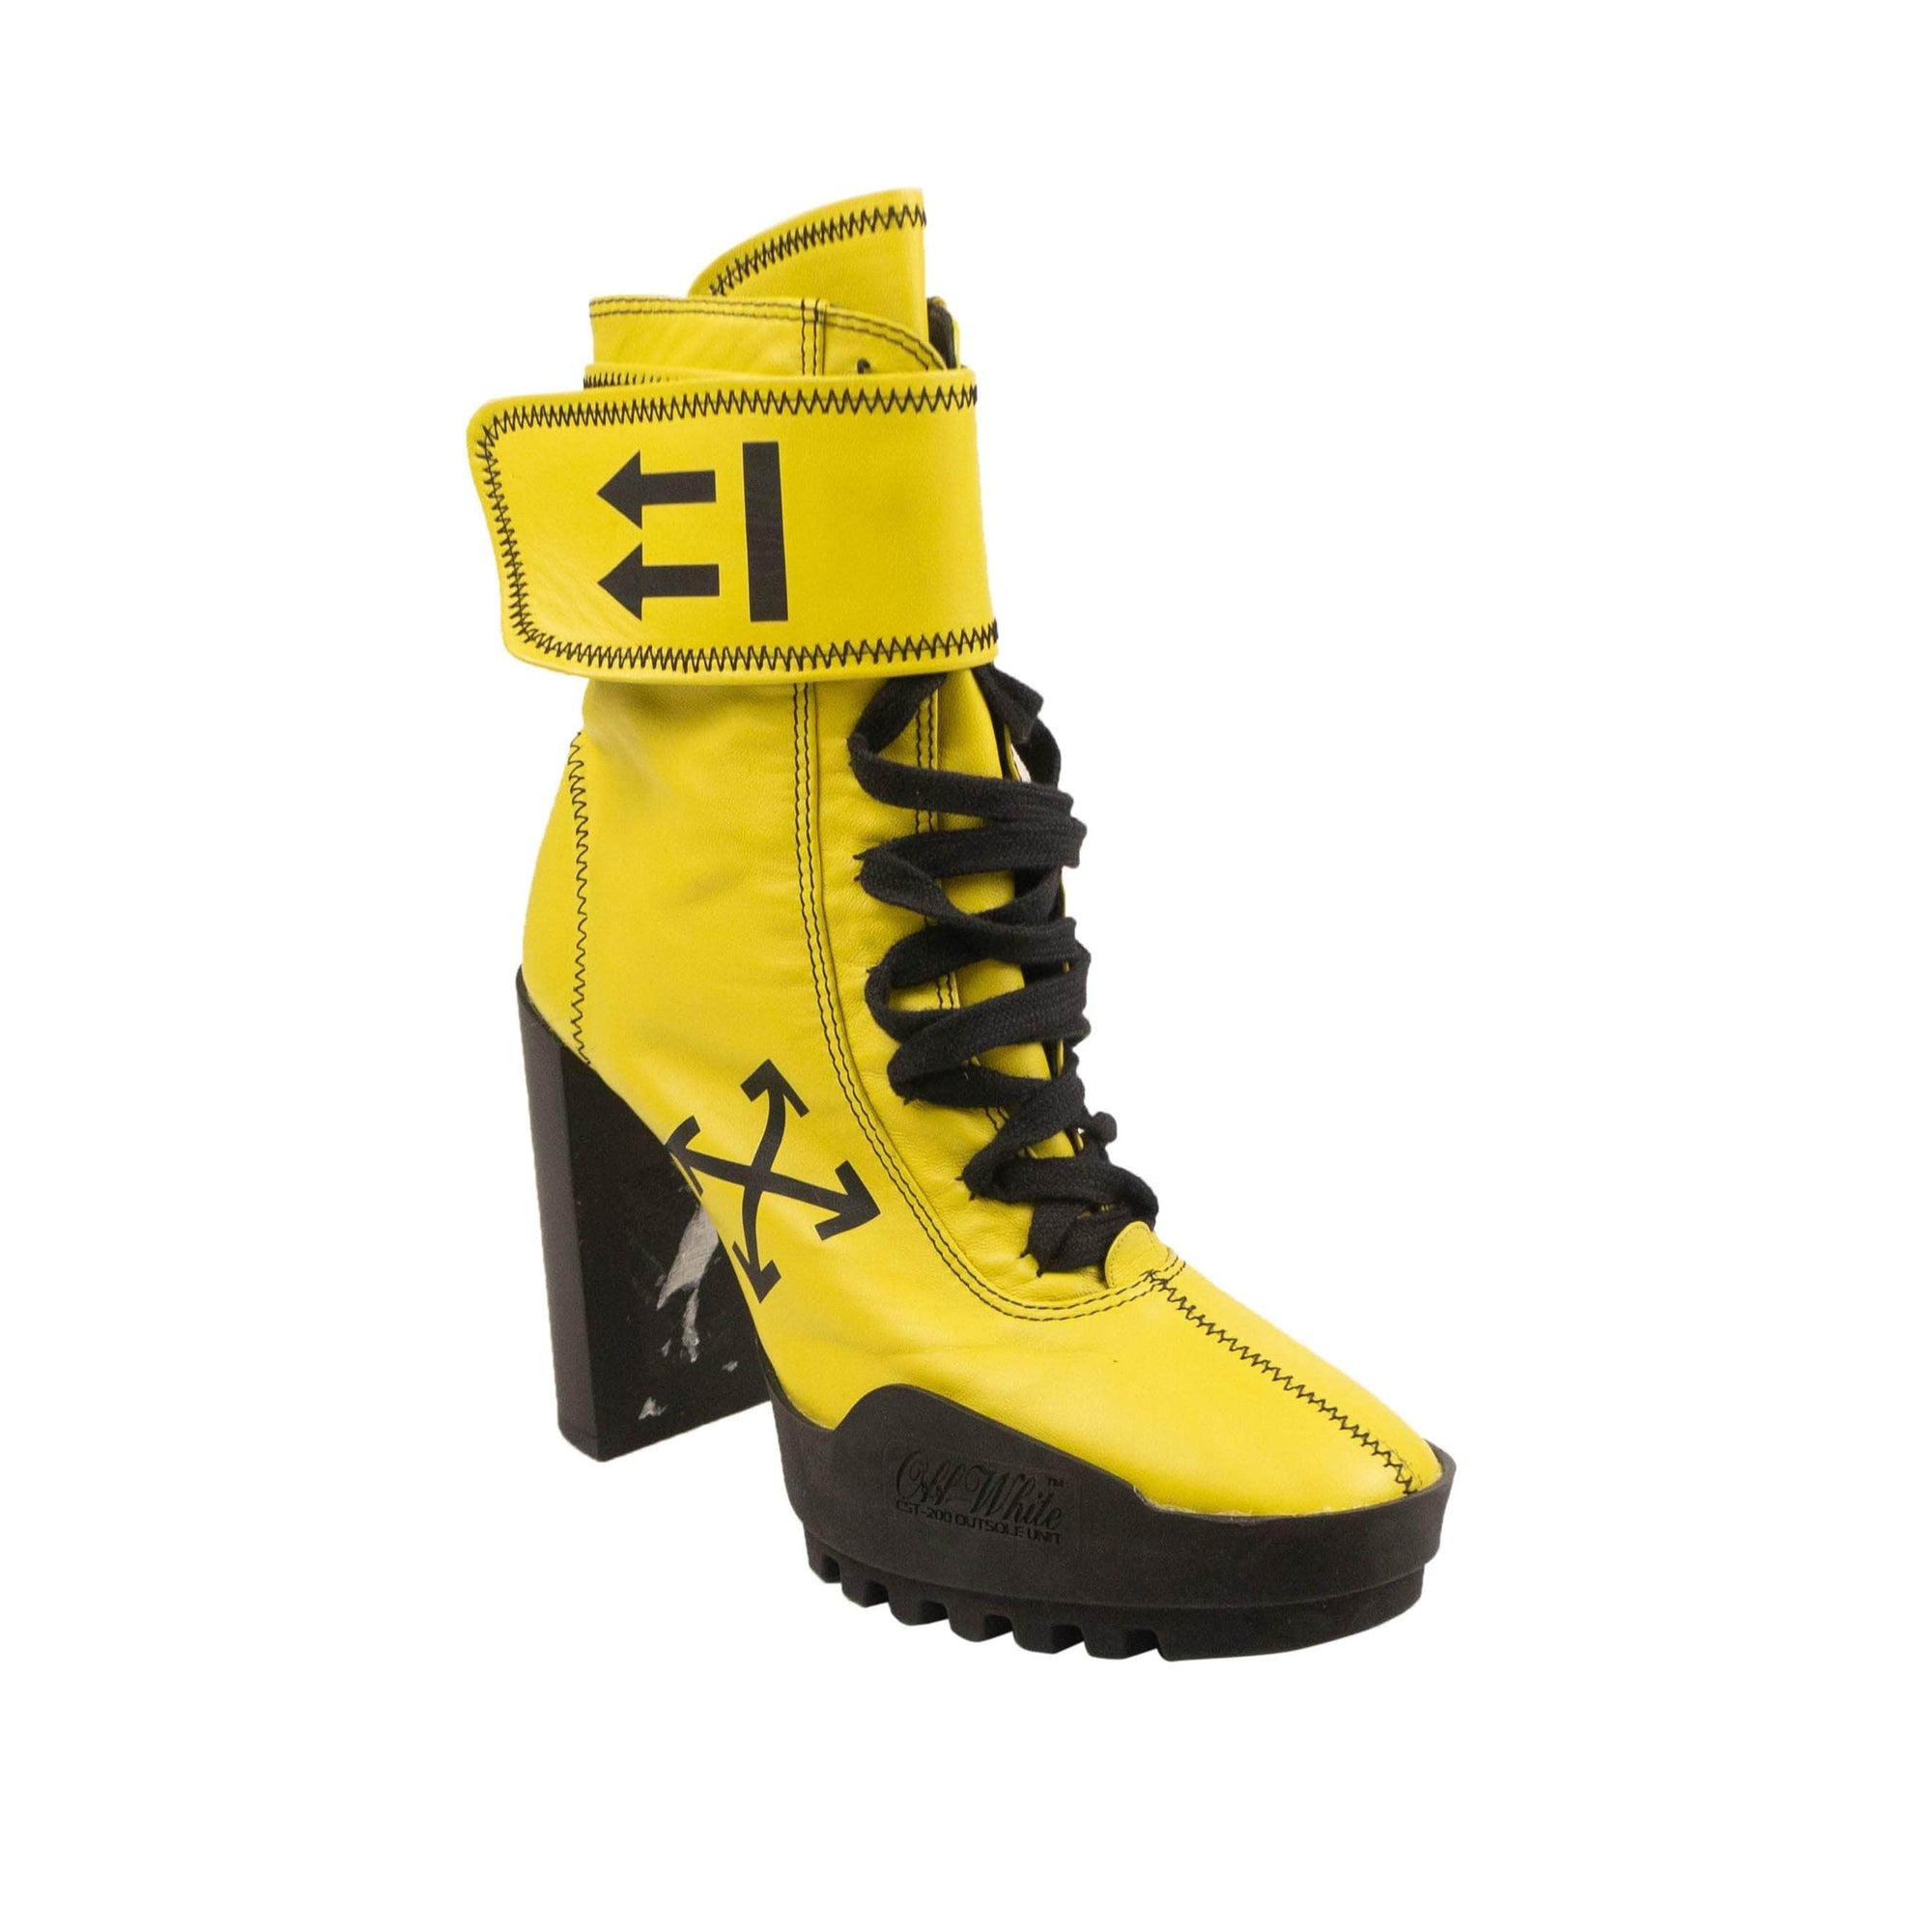 OFF-WHITE c/o VIRGIL ABLOH 1000-2000, 750-1000, channelenable-all, chicmi, couponcollection, gender-womens, main-shoes, off-white-c-o-virgil-abloh, OWW, size-35, size-36, size-37, size-38, size-39, size-40, womens-pumps-heels Yellow Leather Moto Wrap Boots